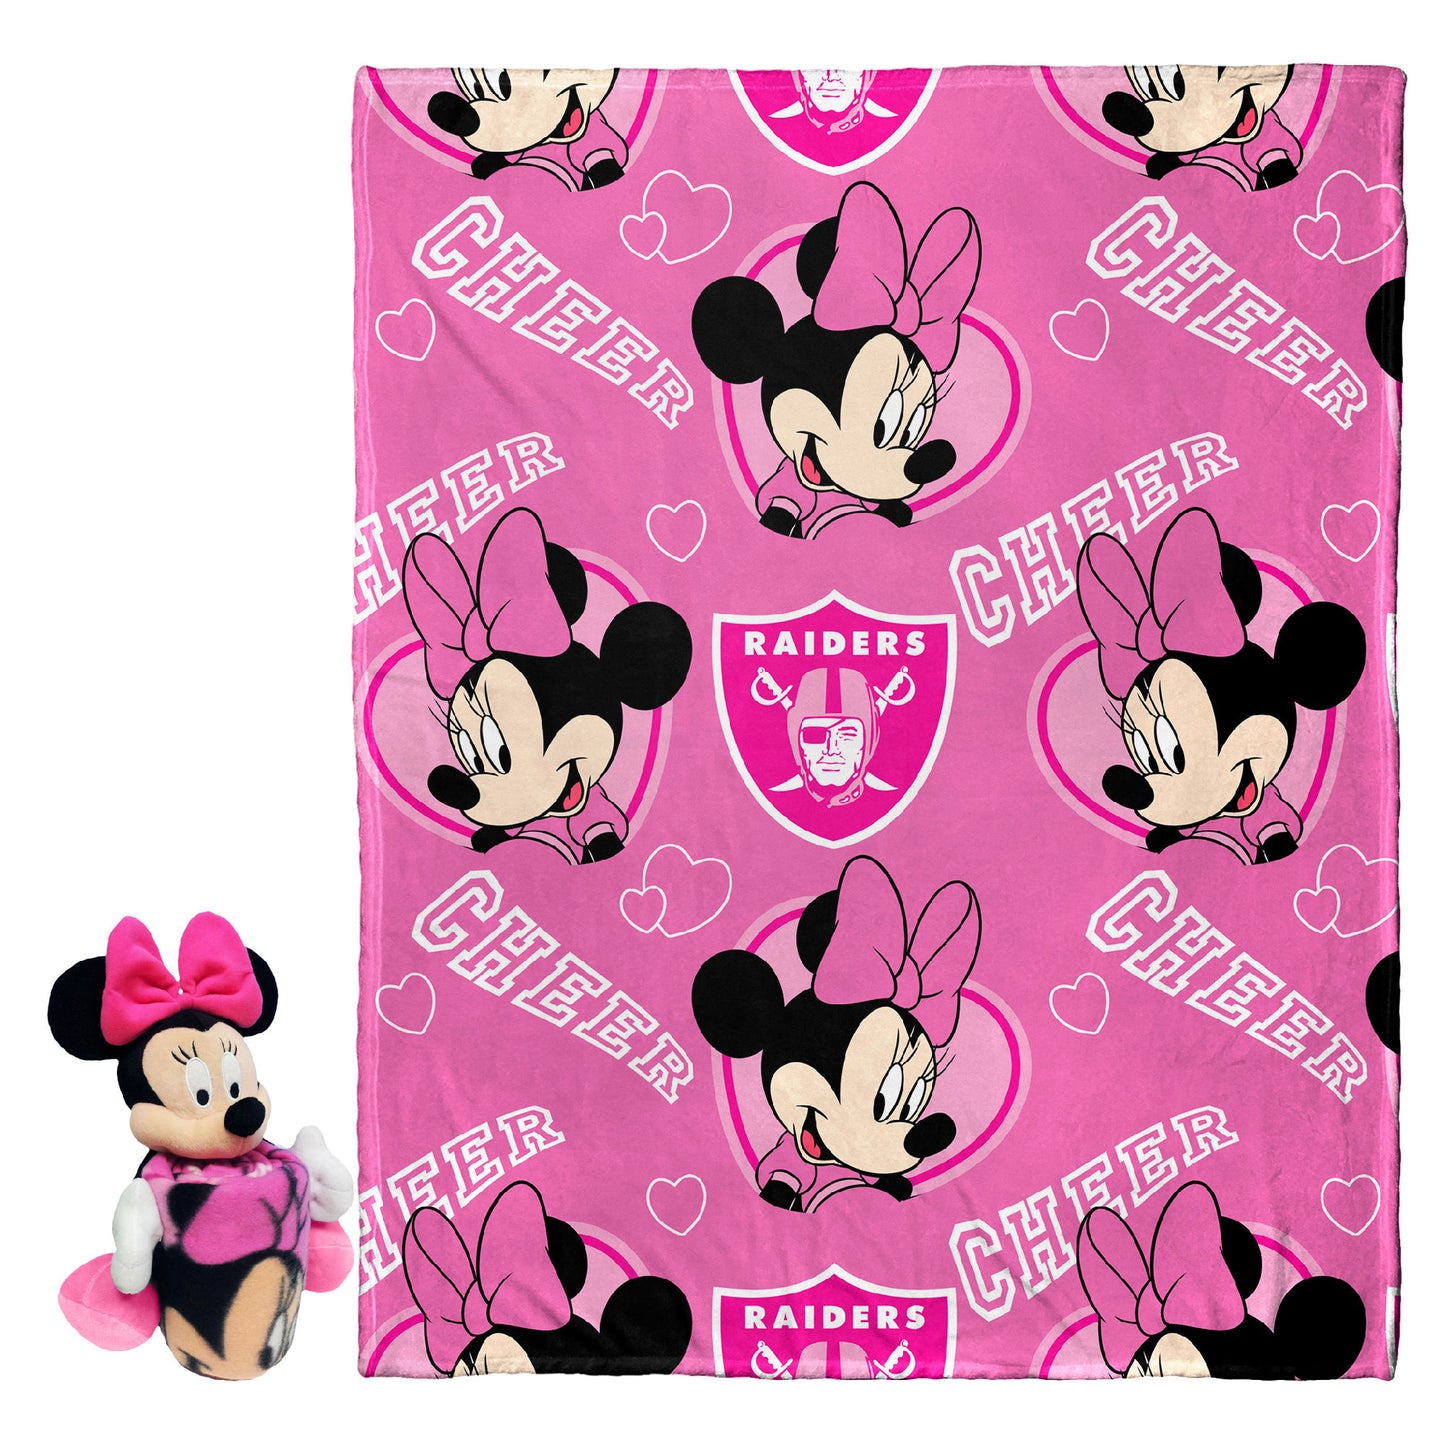 NFL - COB 312 Raiders OFFICIAL NFL & Disney's Minnie Mouse Character Hugger Pillow & Silk Touch Throw Set;  40" x 50"